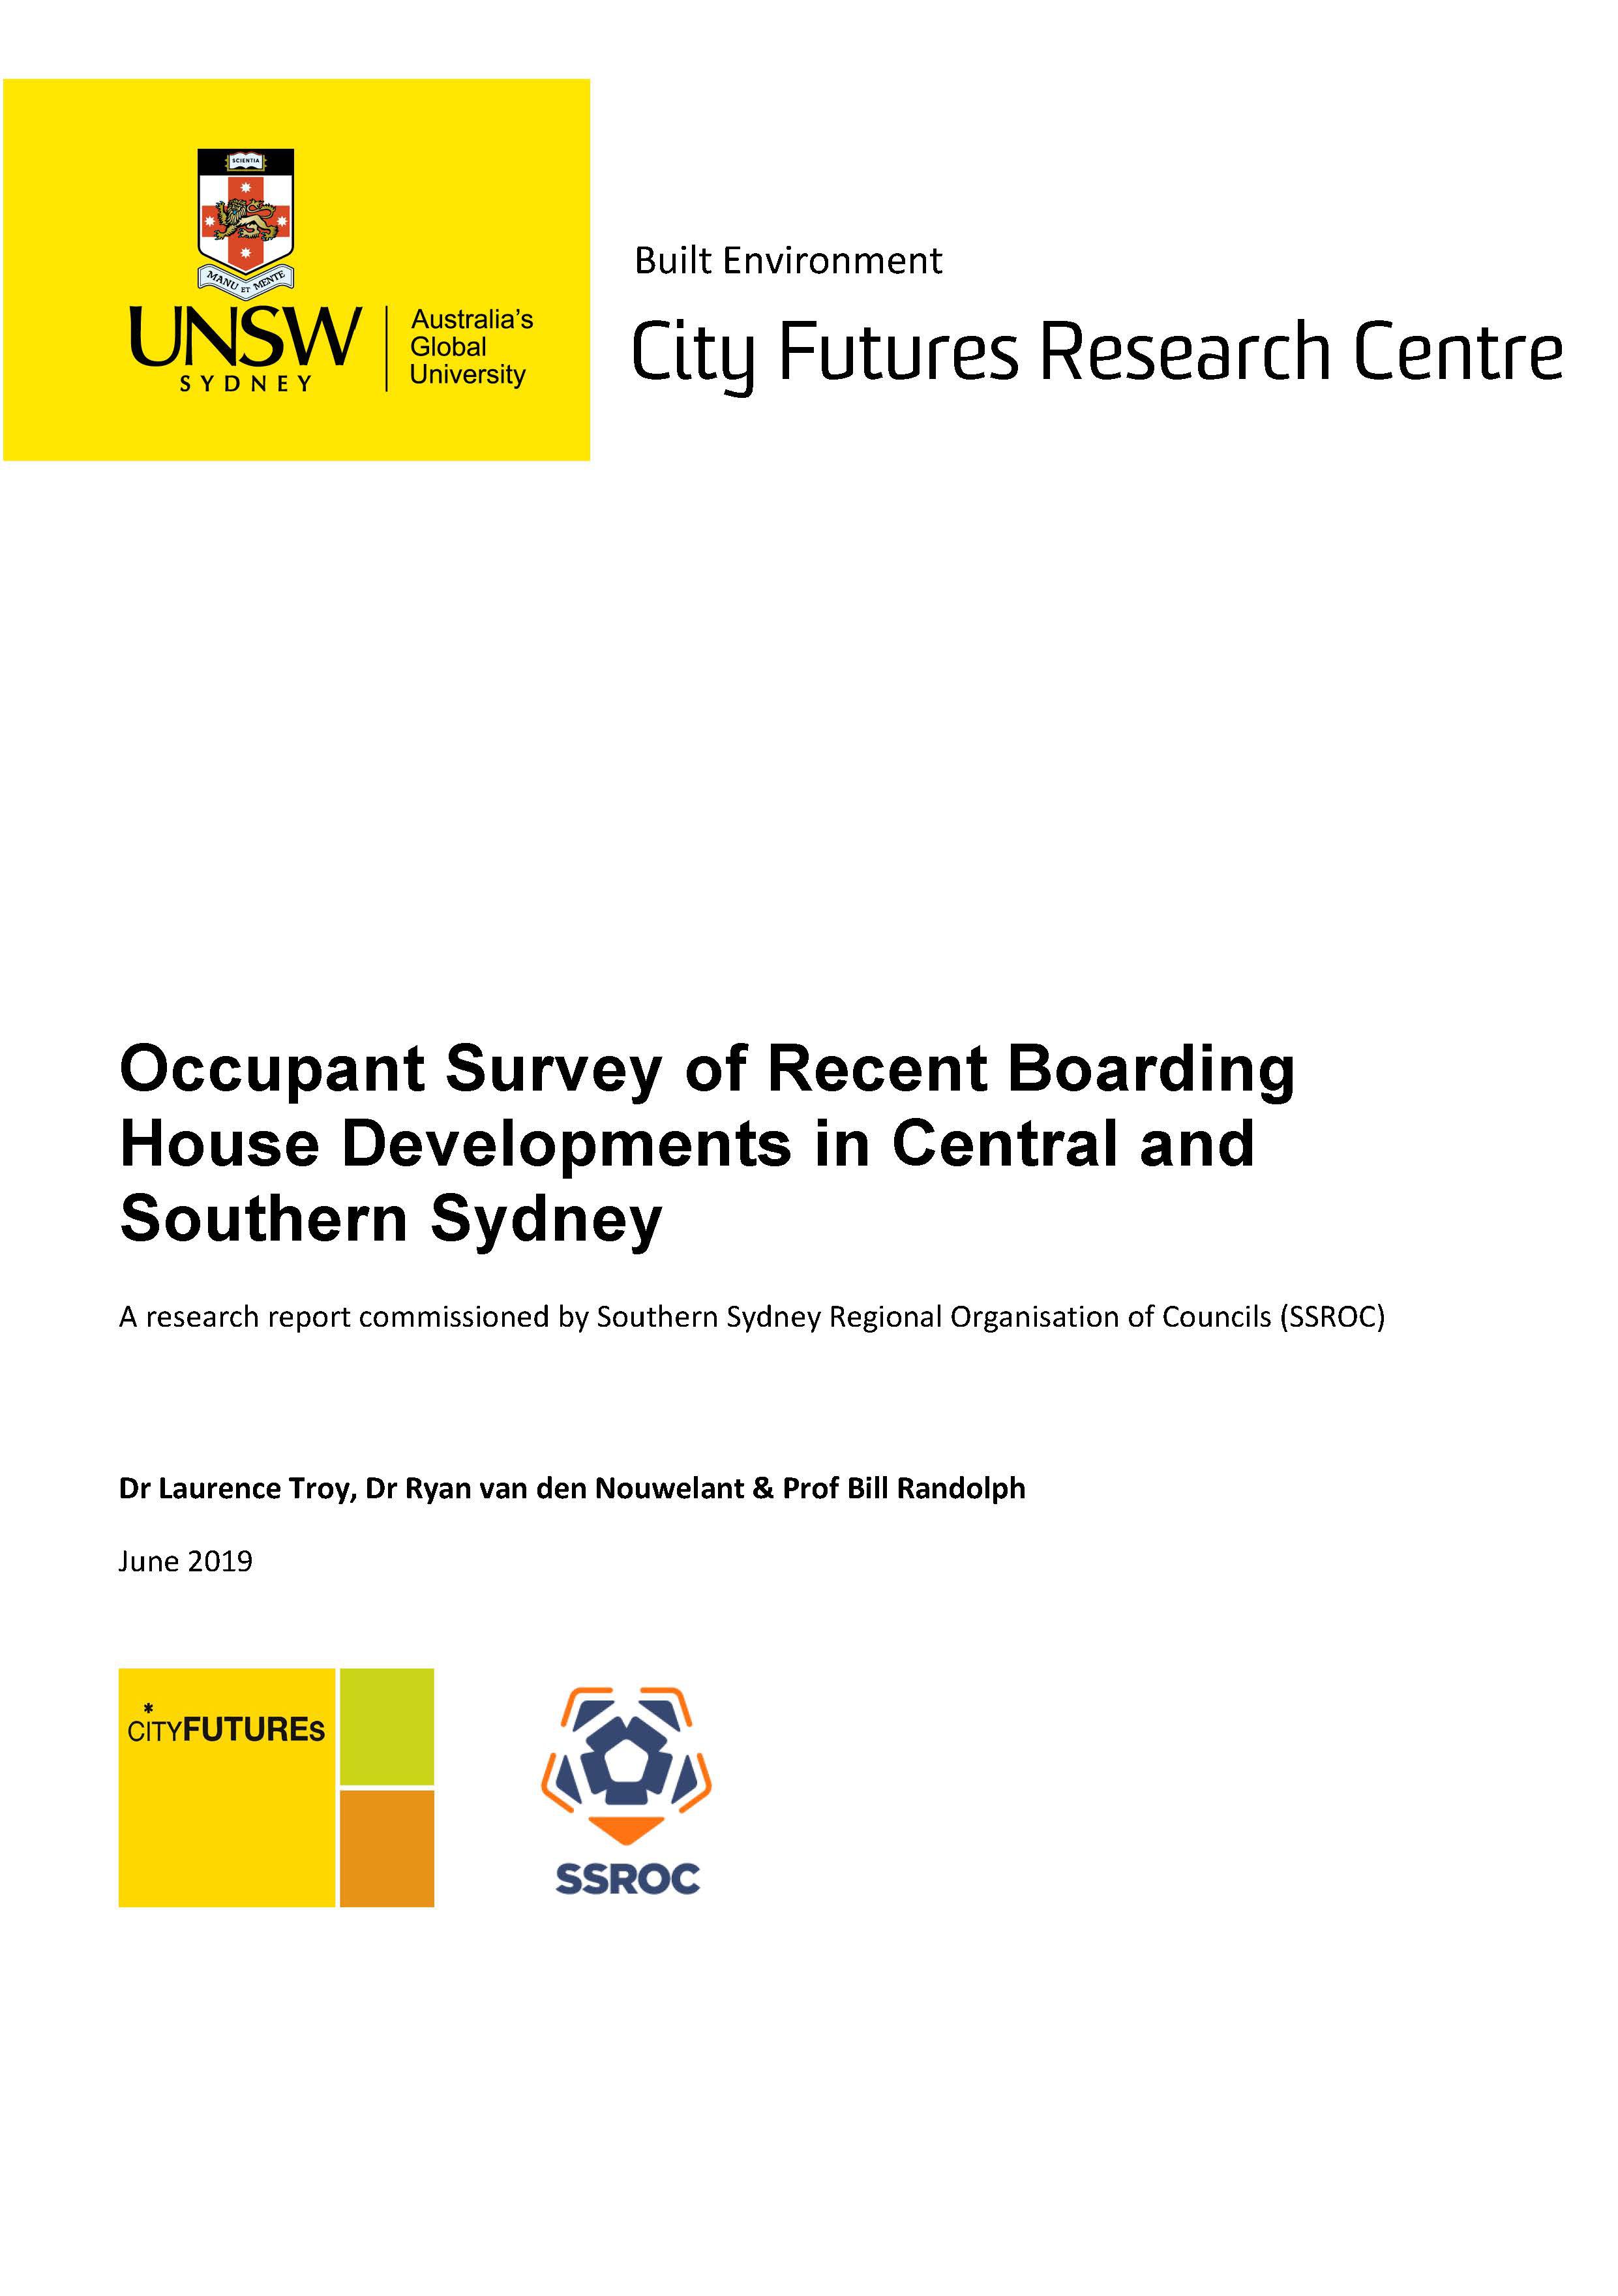 Boarding House Survey SSROC_FINAL_cover.jpg